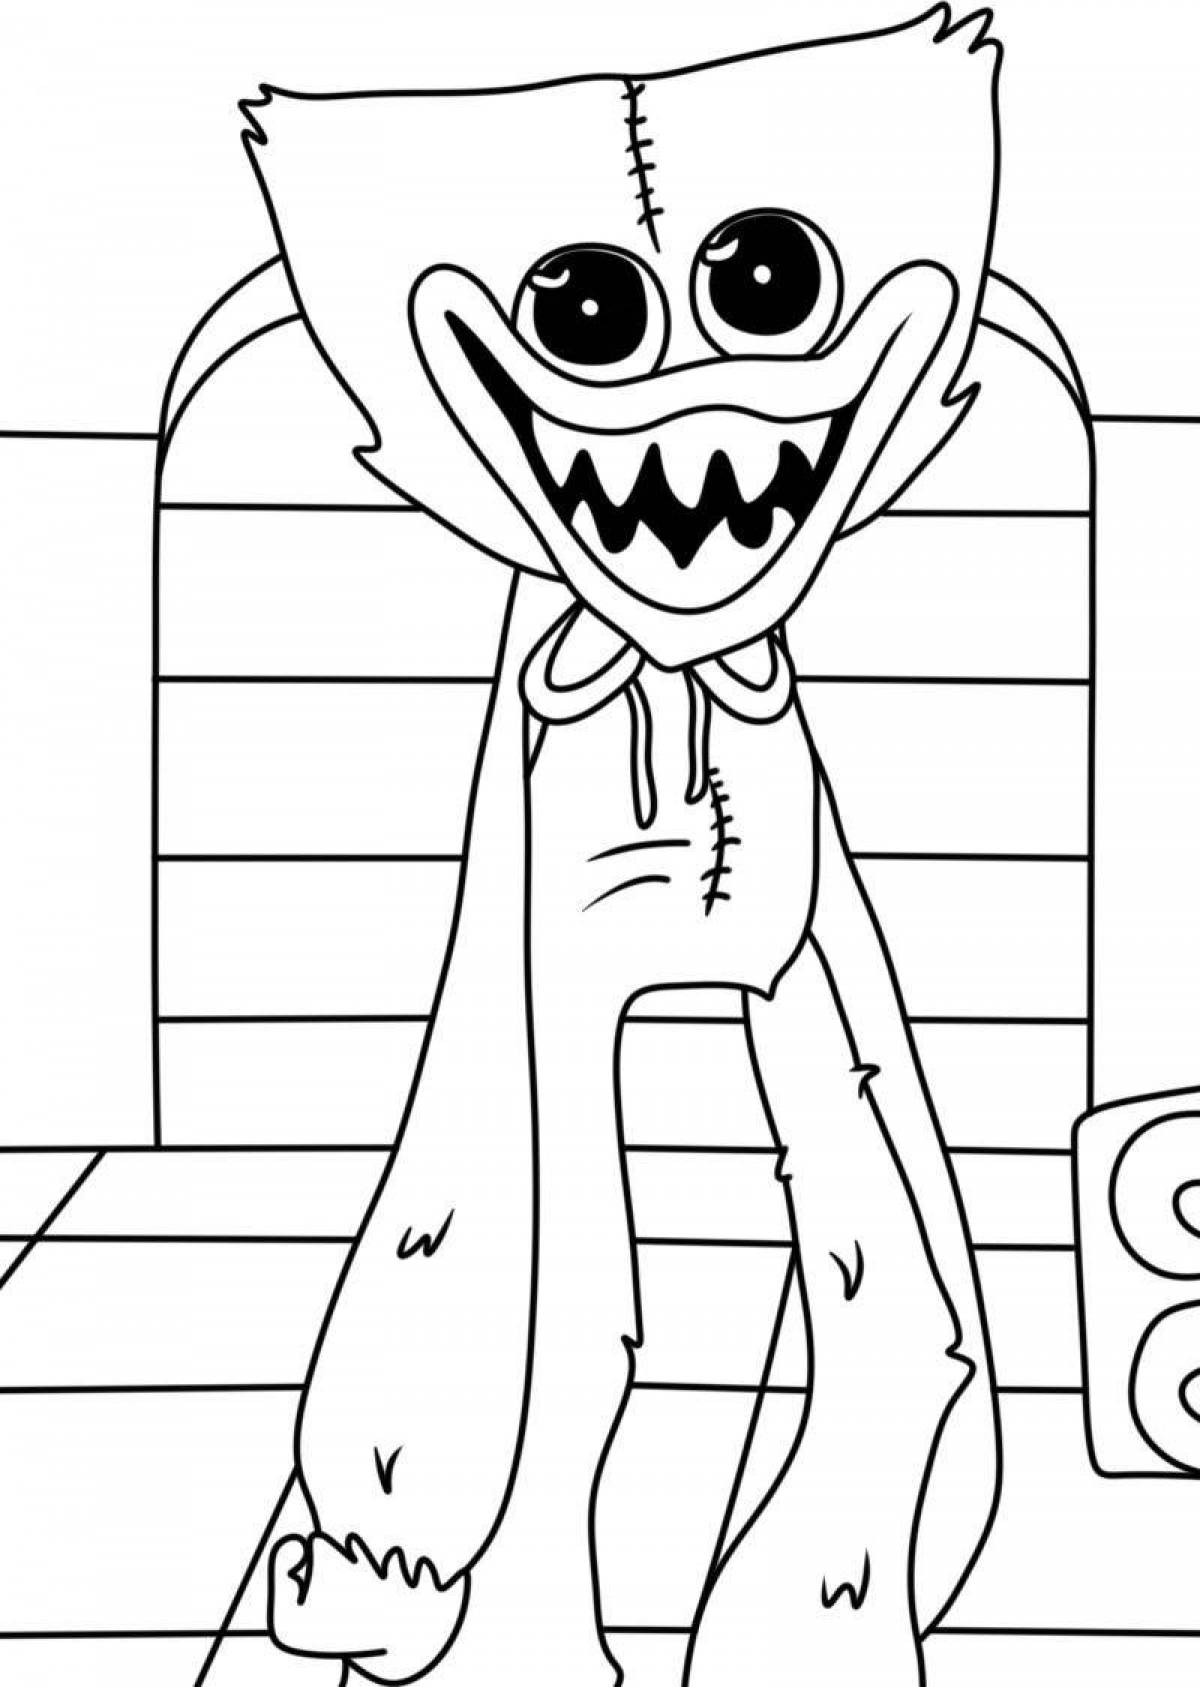 Huggy waggie humorous coloring book